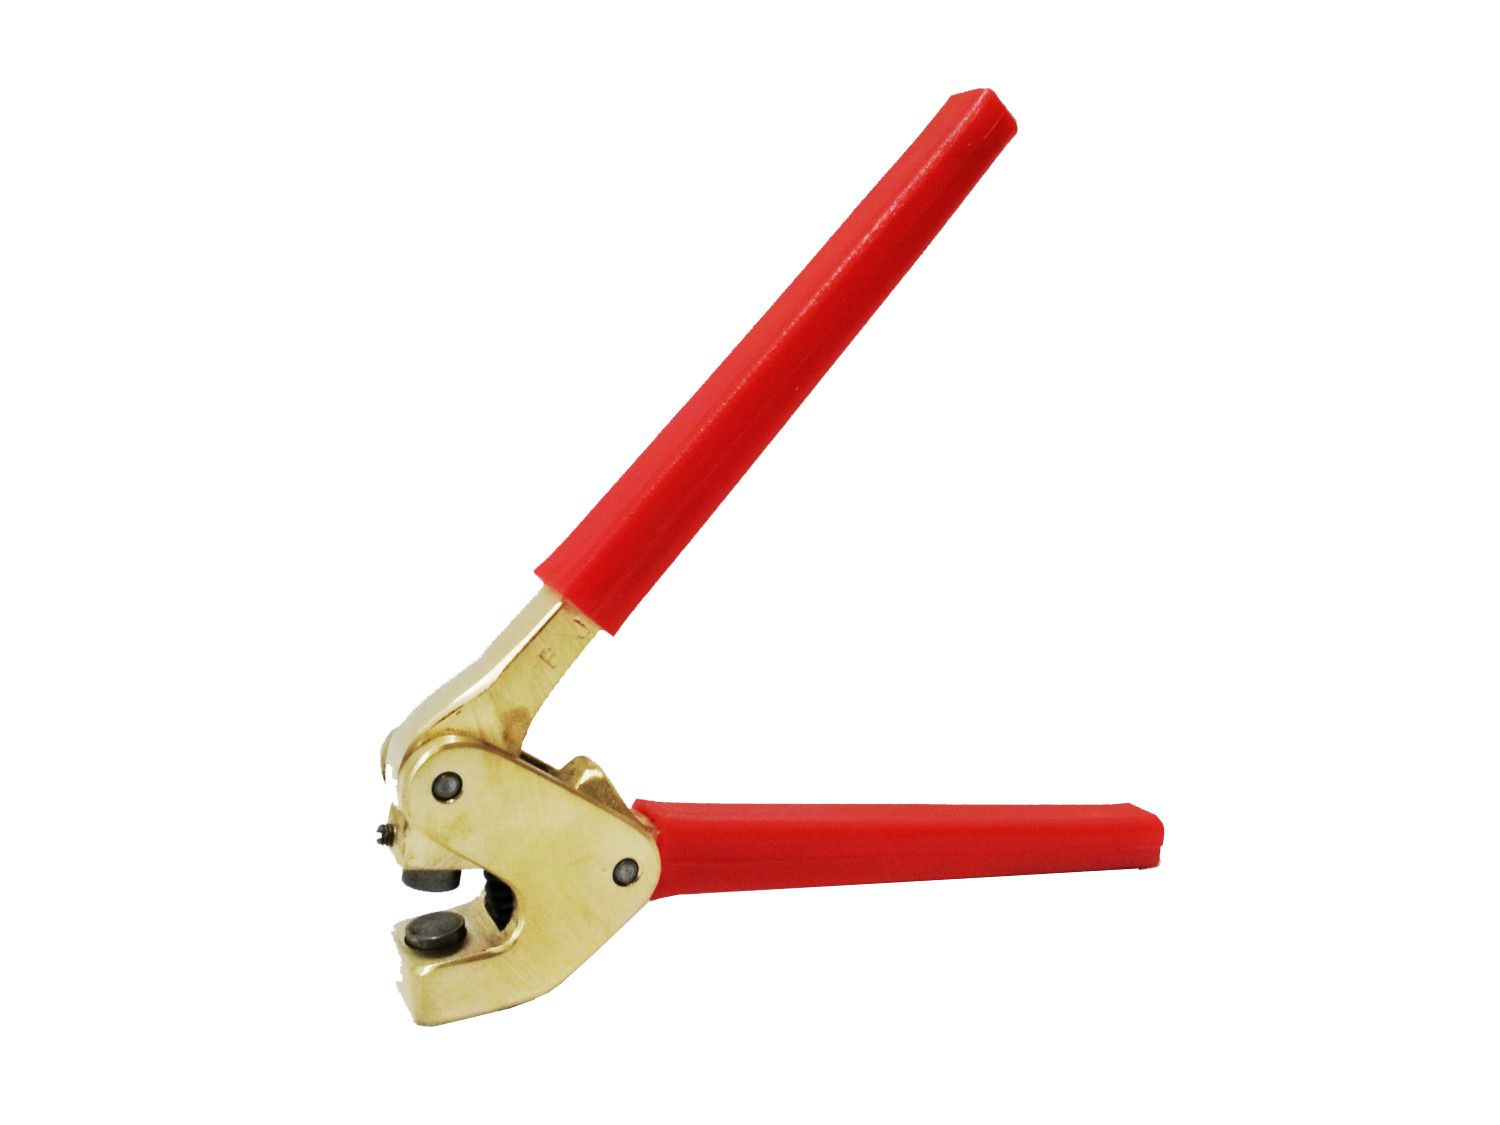 QLOUNI Sealing Pliers Set - Sealing Crimper with Red Plastic